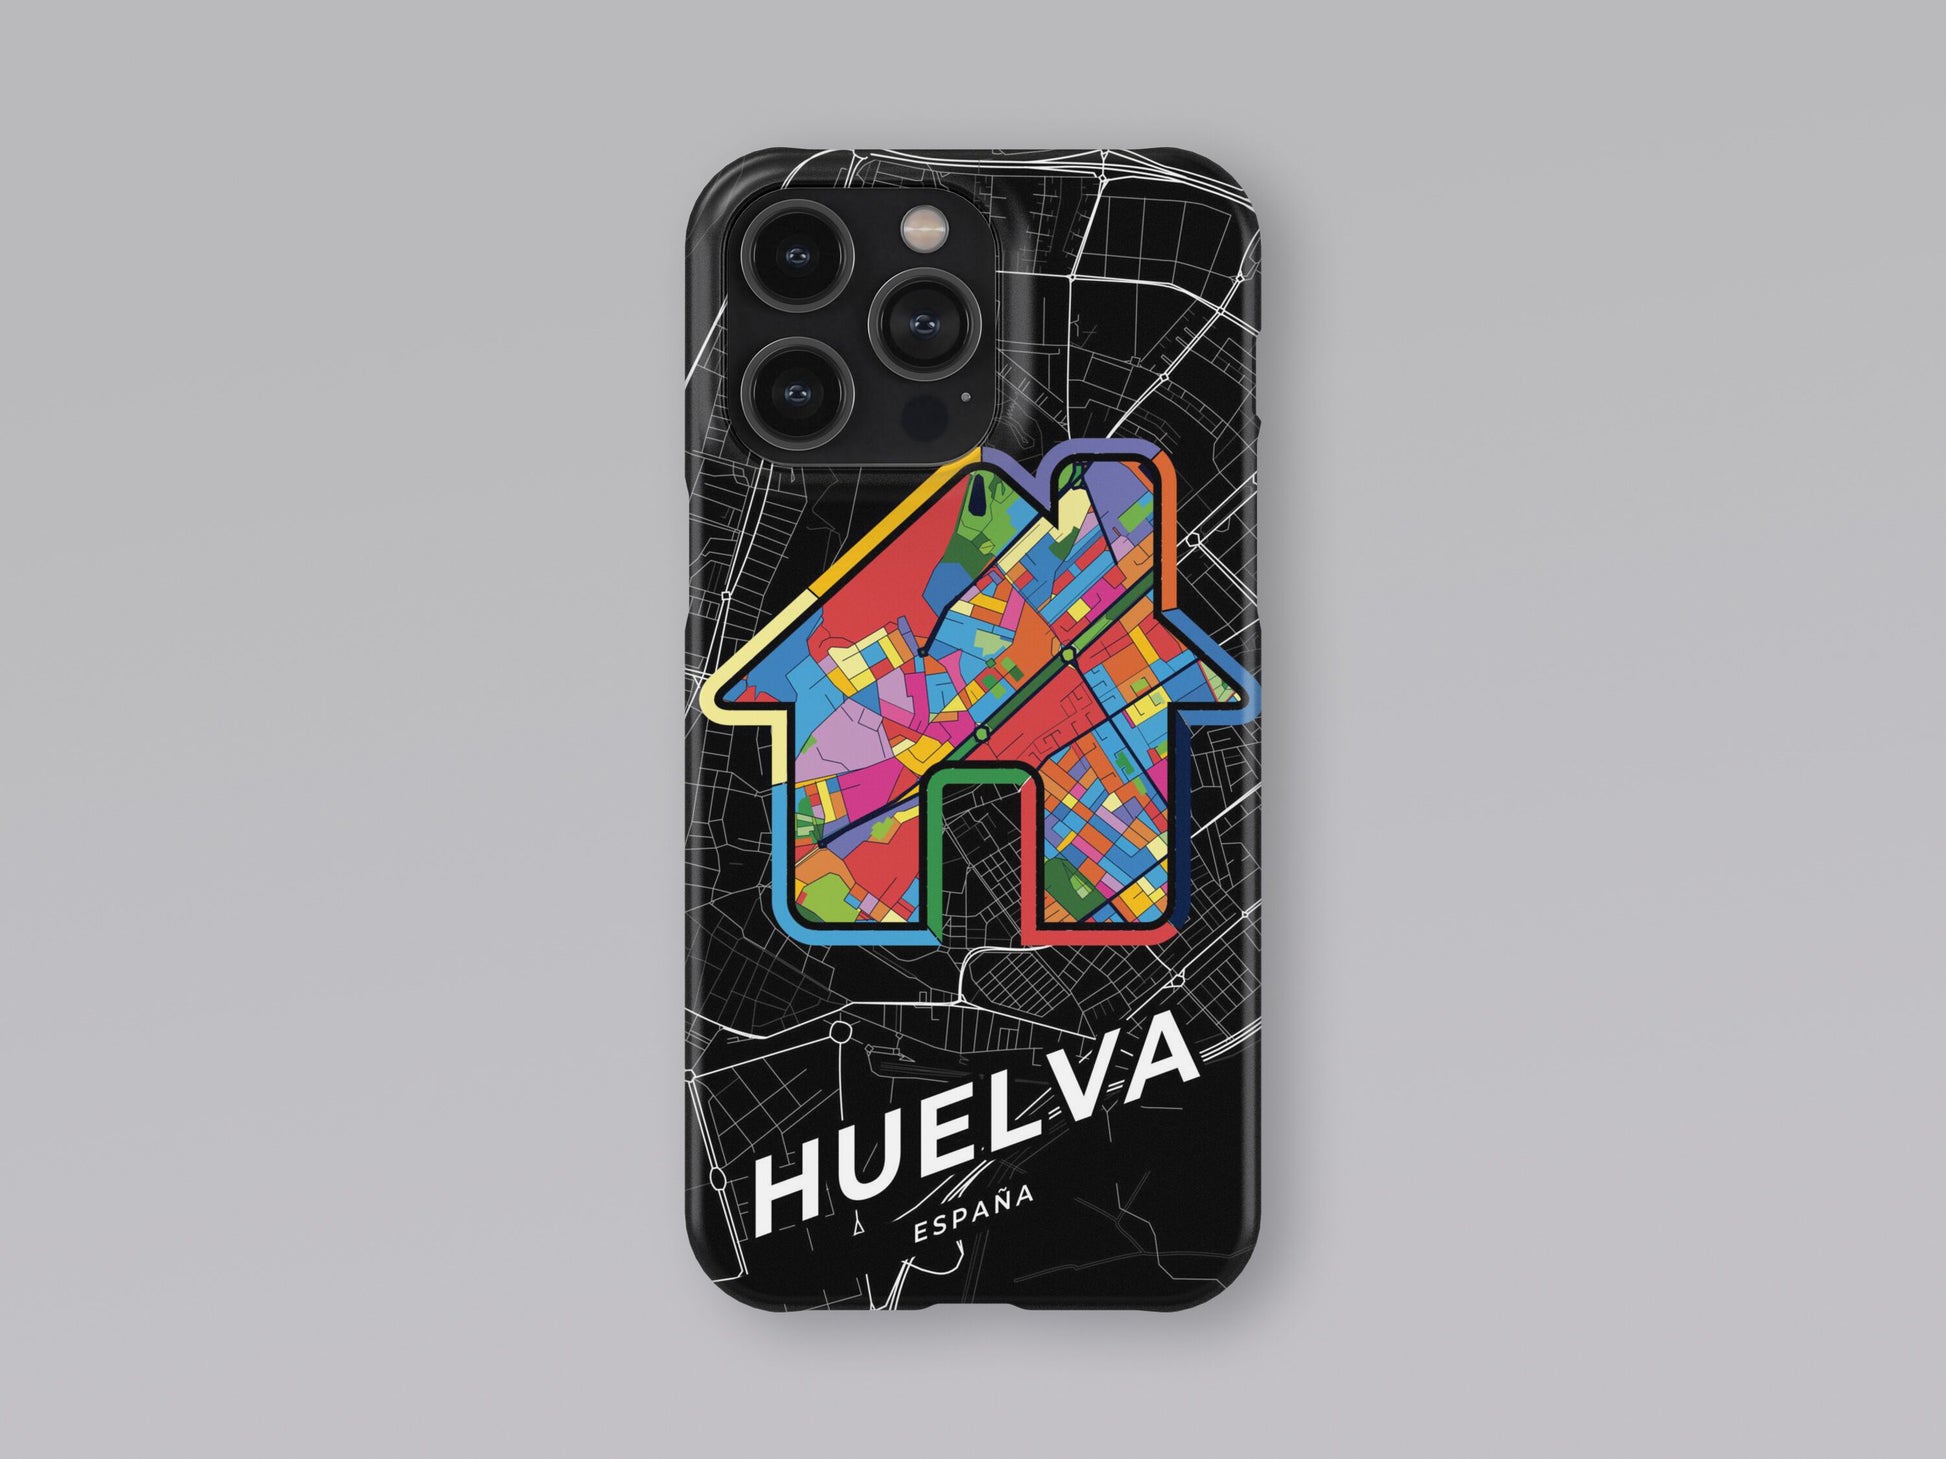 Huelva Spain slim phone case with colorful icon. Birthday, wedding or housewarming gift. Couple match cases. 3